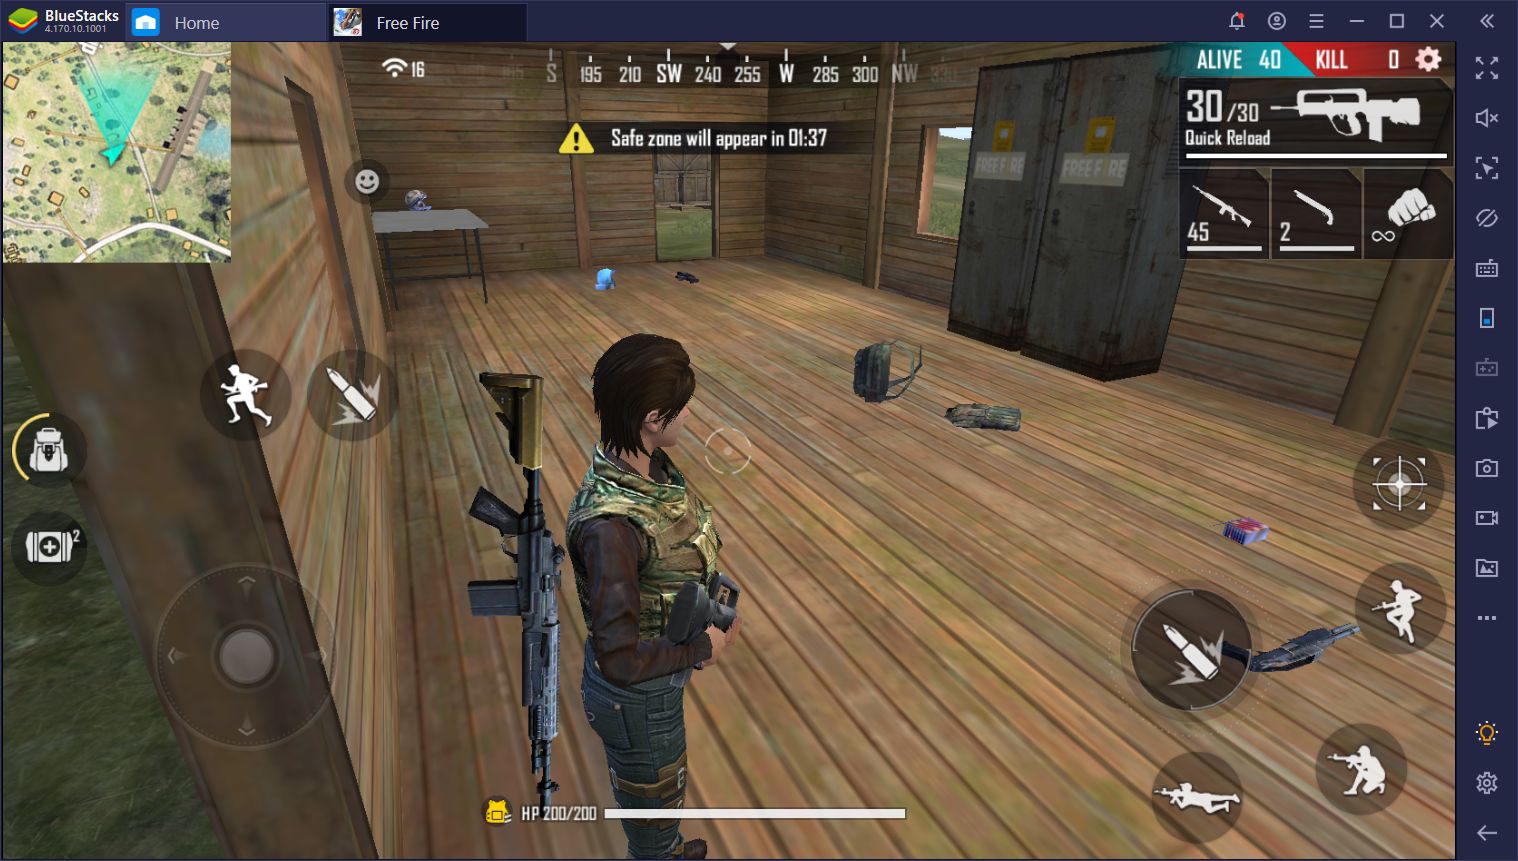 Garena Free Fire Feb 2020 Patch - Uninterrupted Booyahs with Smart Controls only on BlueStacks